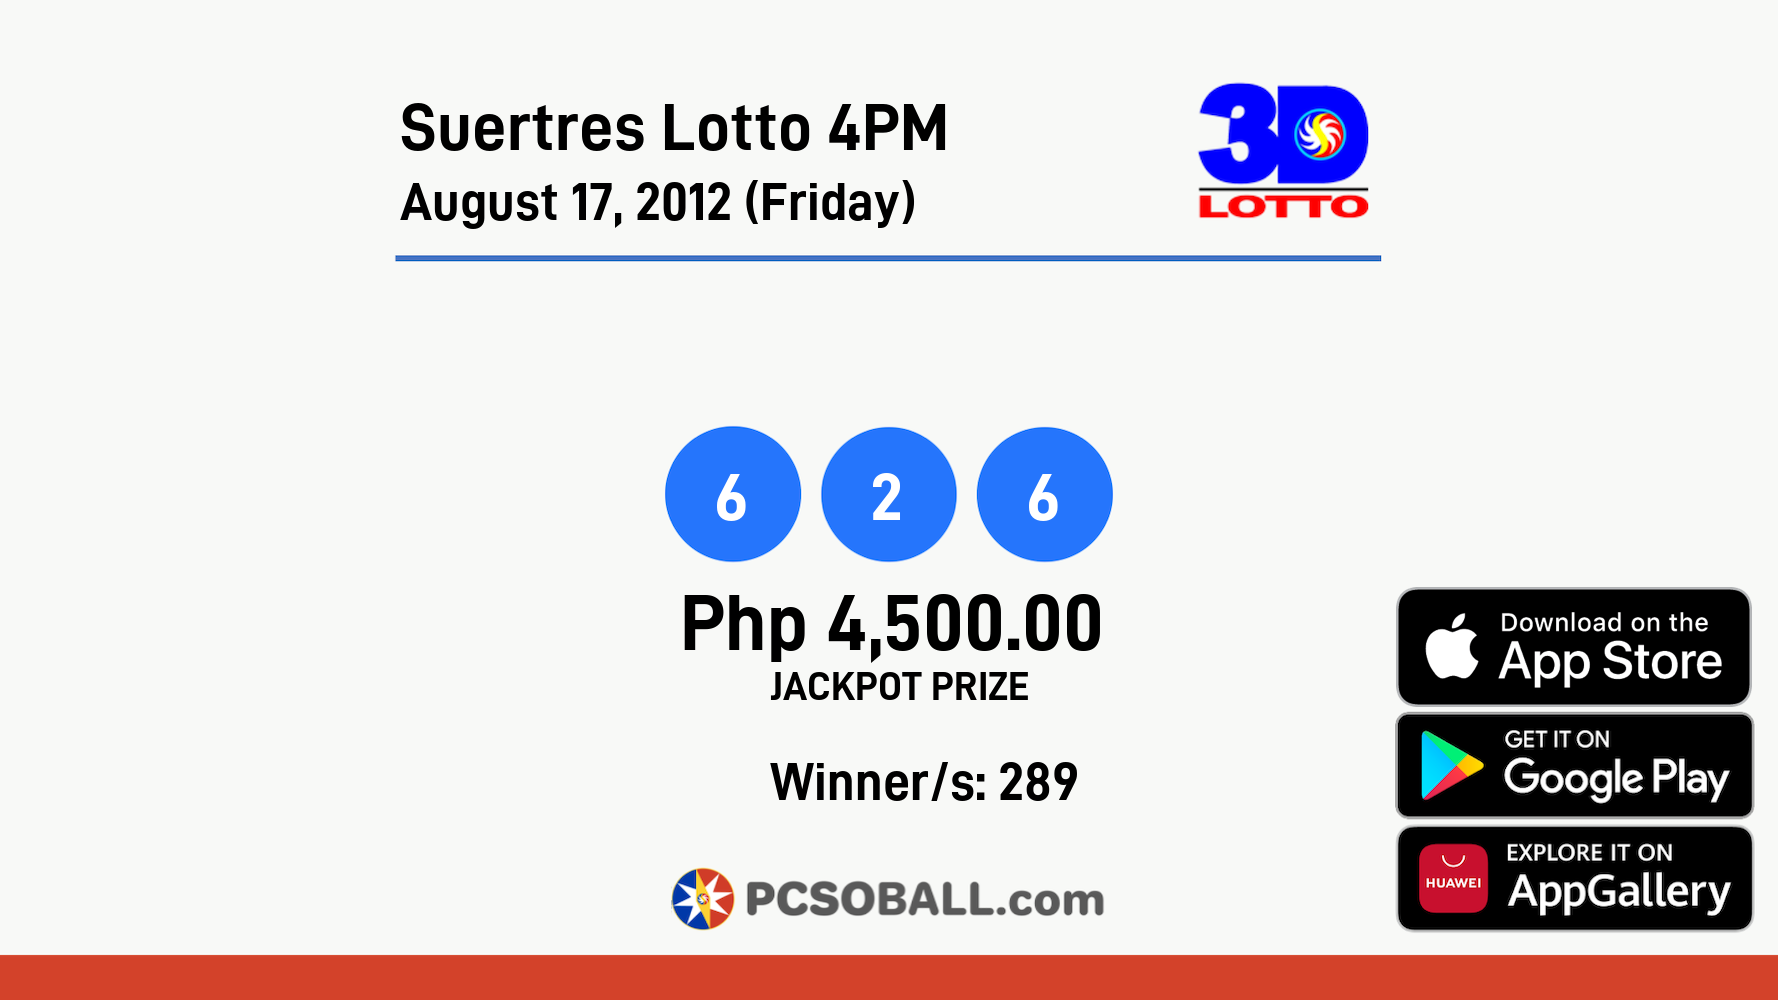 Suertres Lotto 4PM August 17, 2012 (Friday) Result